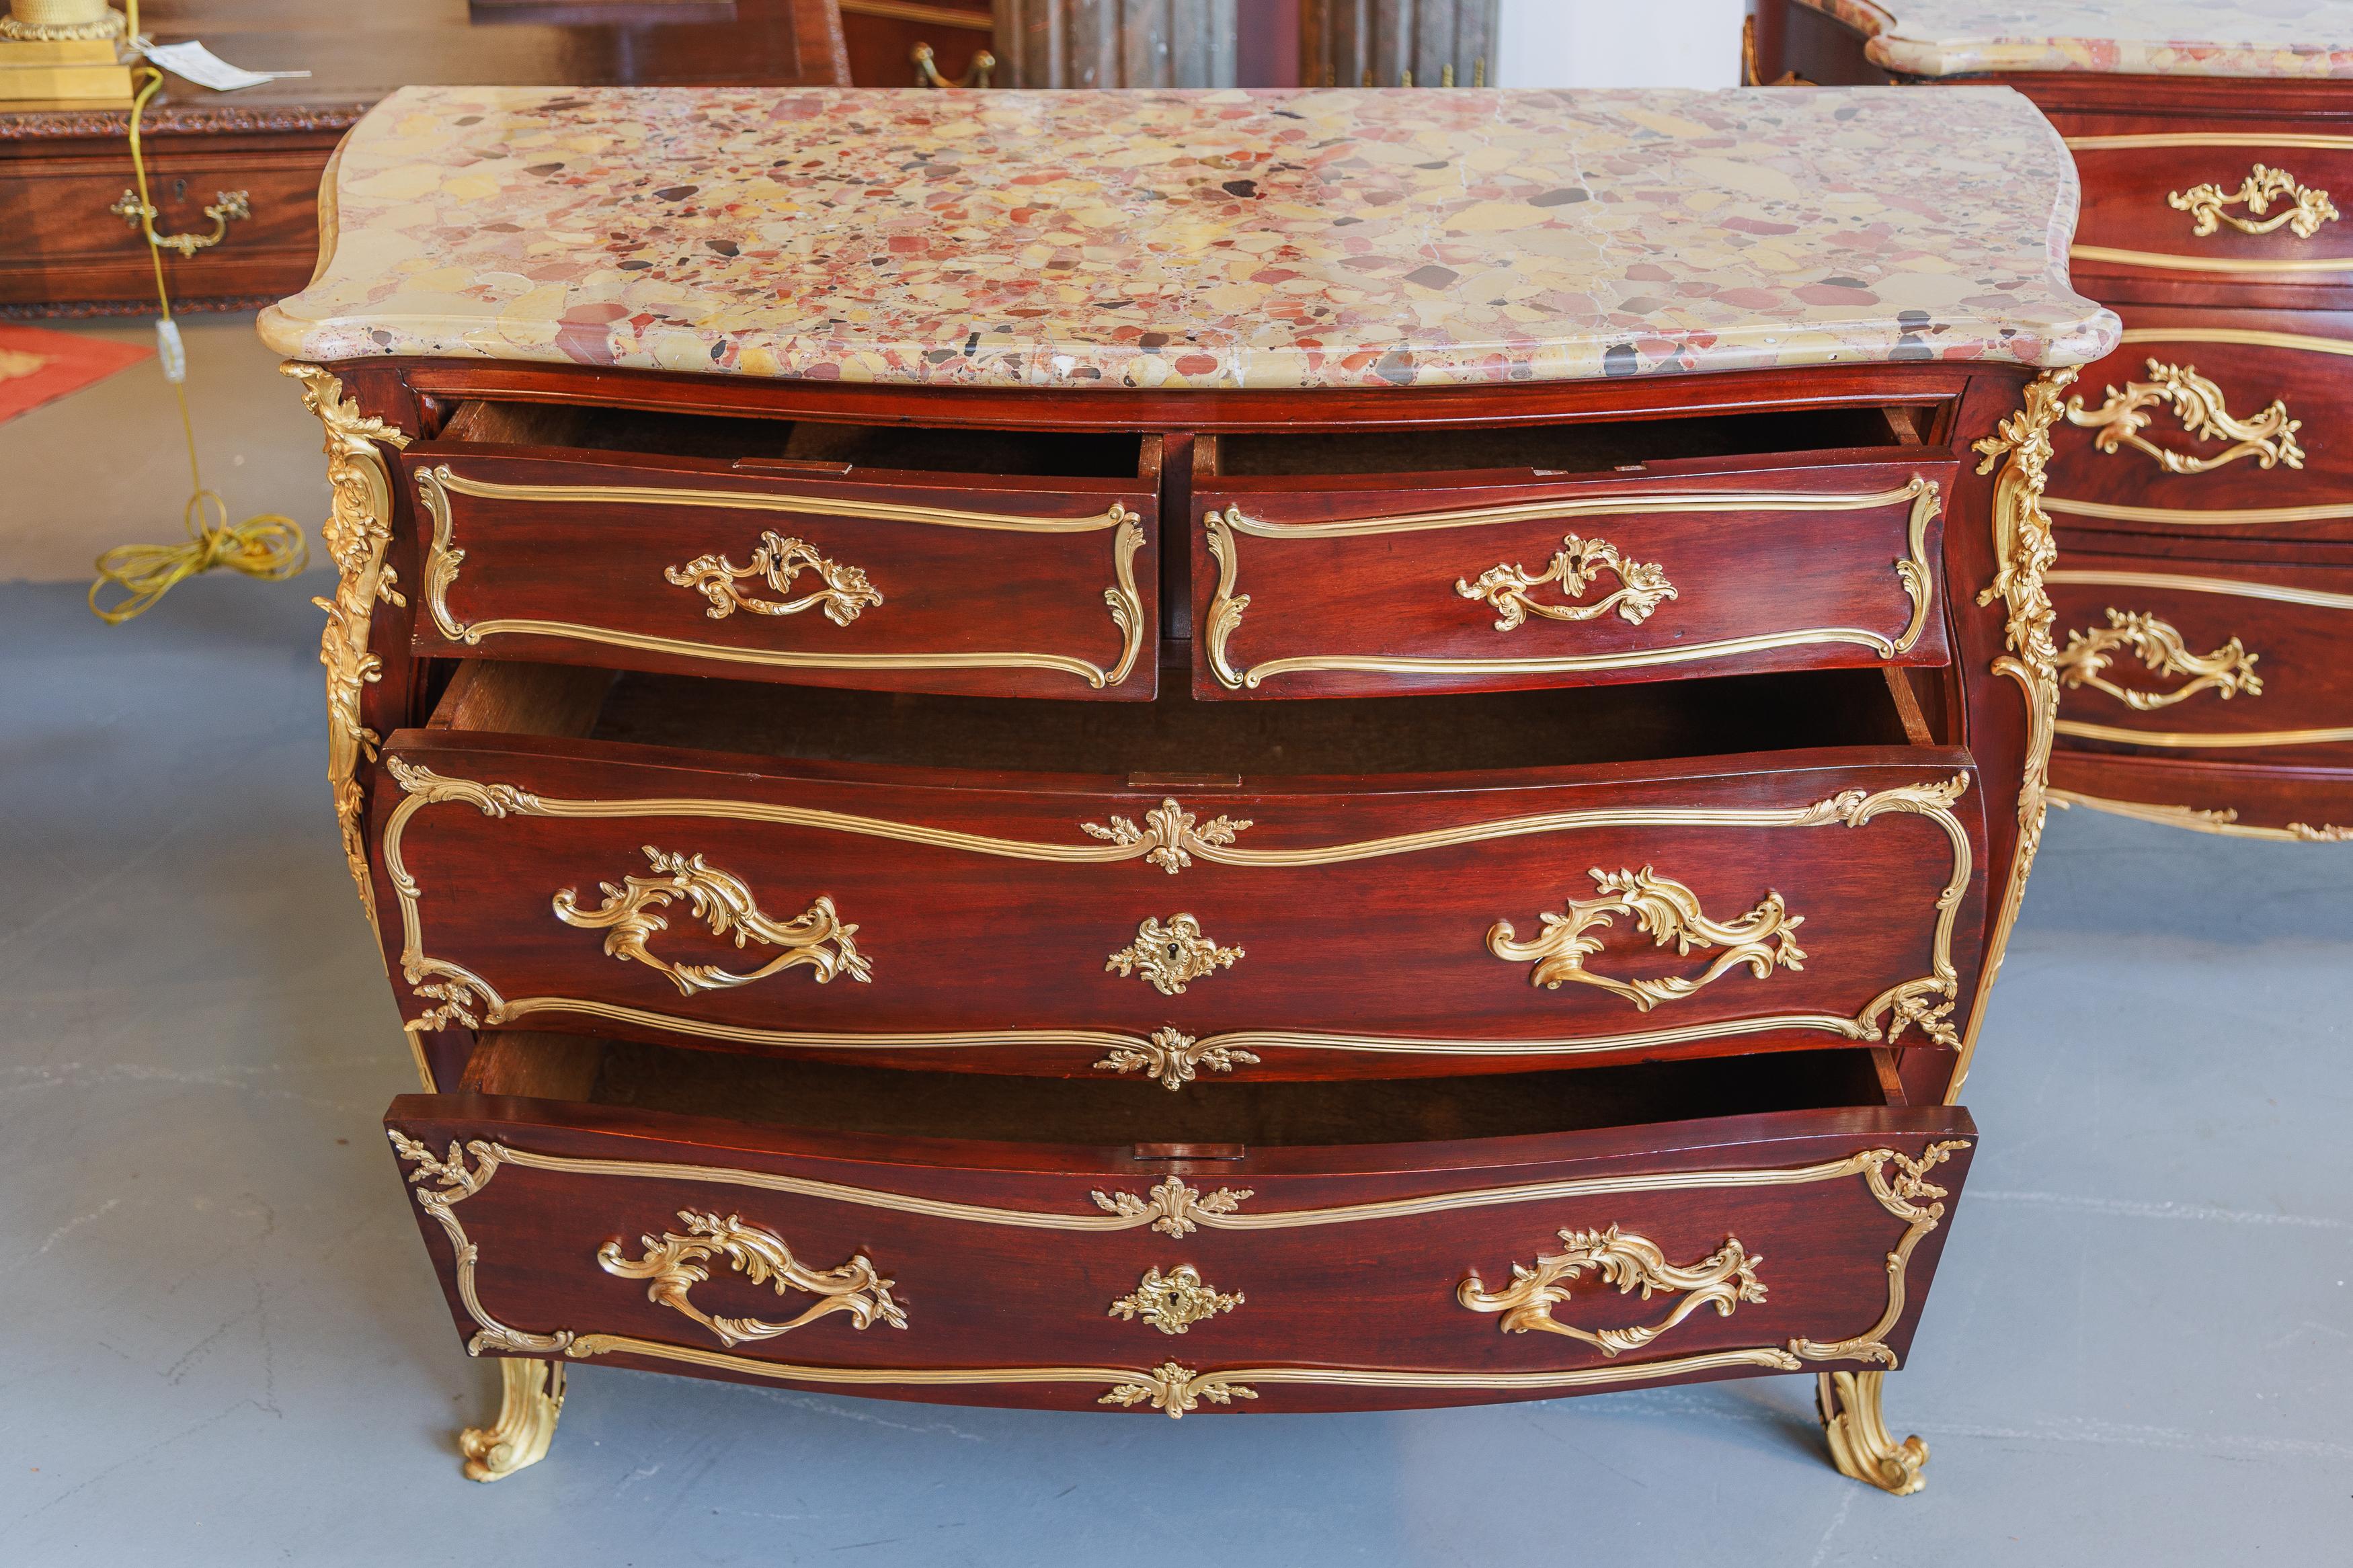 19th Century A  pair of French 19th c mahogany and gilt bronze mounted commodes by F. Linke For Sale